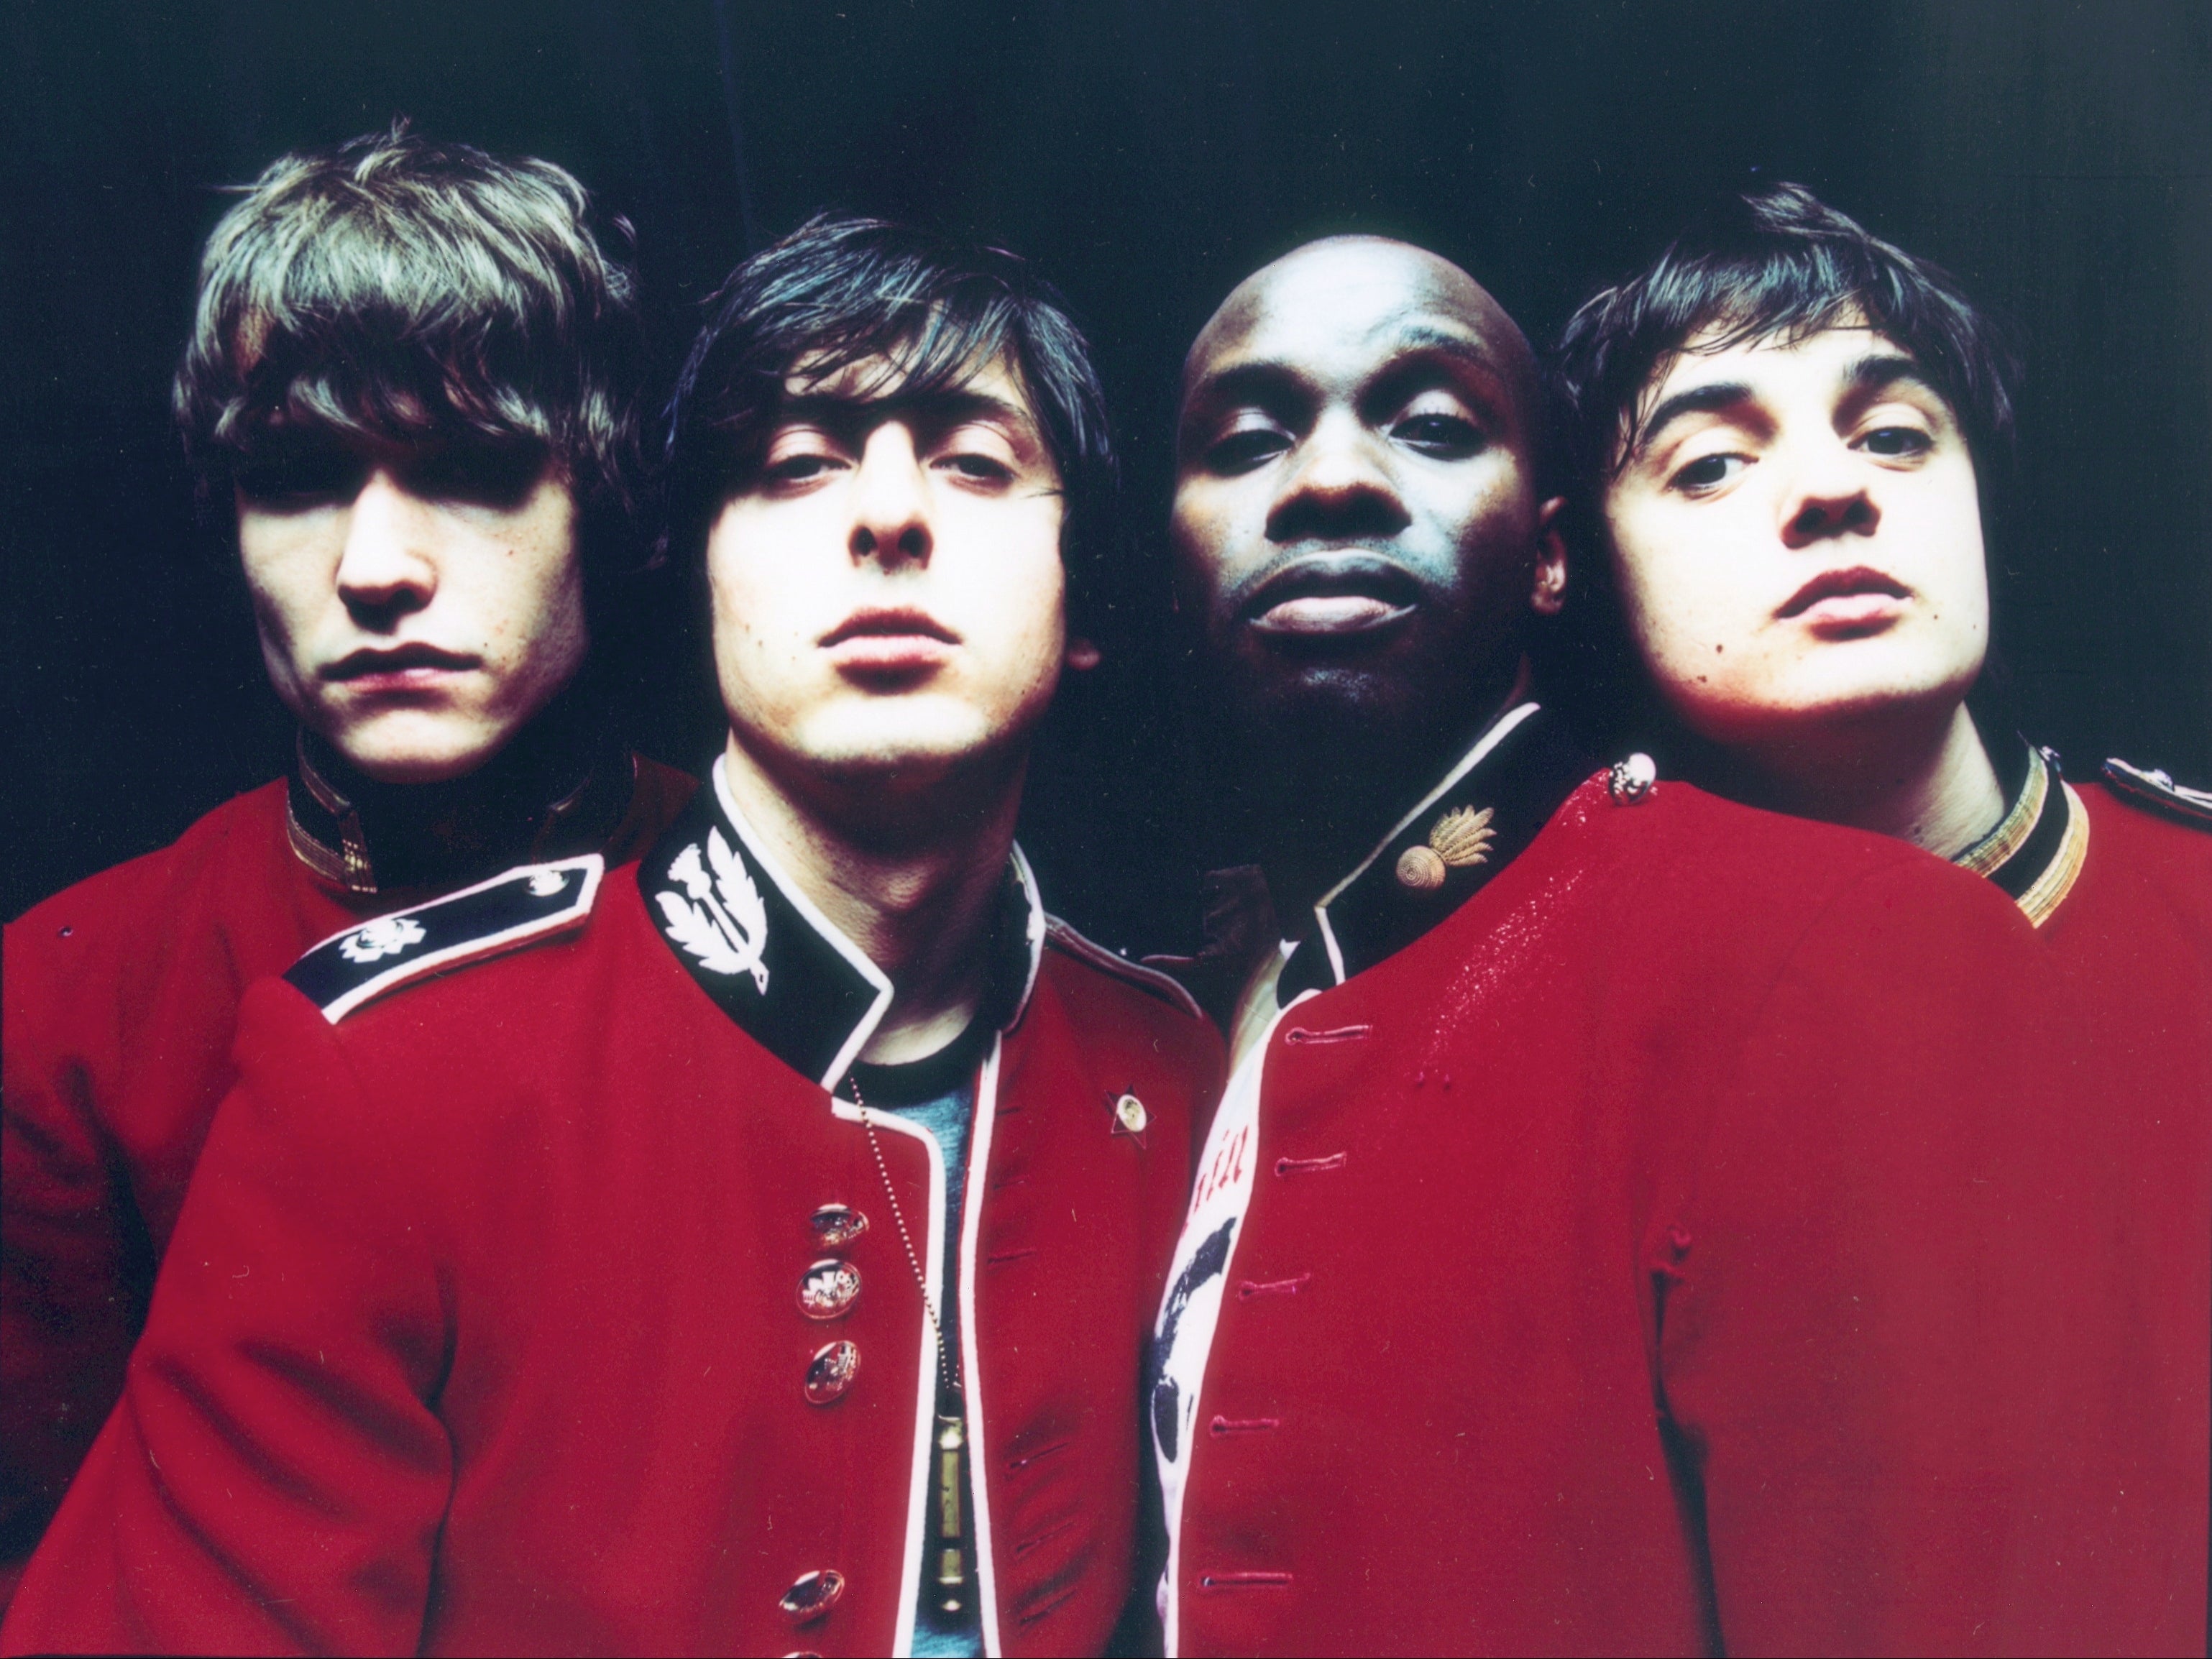 The Libertines in 2002: (l-r) John Hassall, Carl Barât, Gary Powell and Pete Doherty